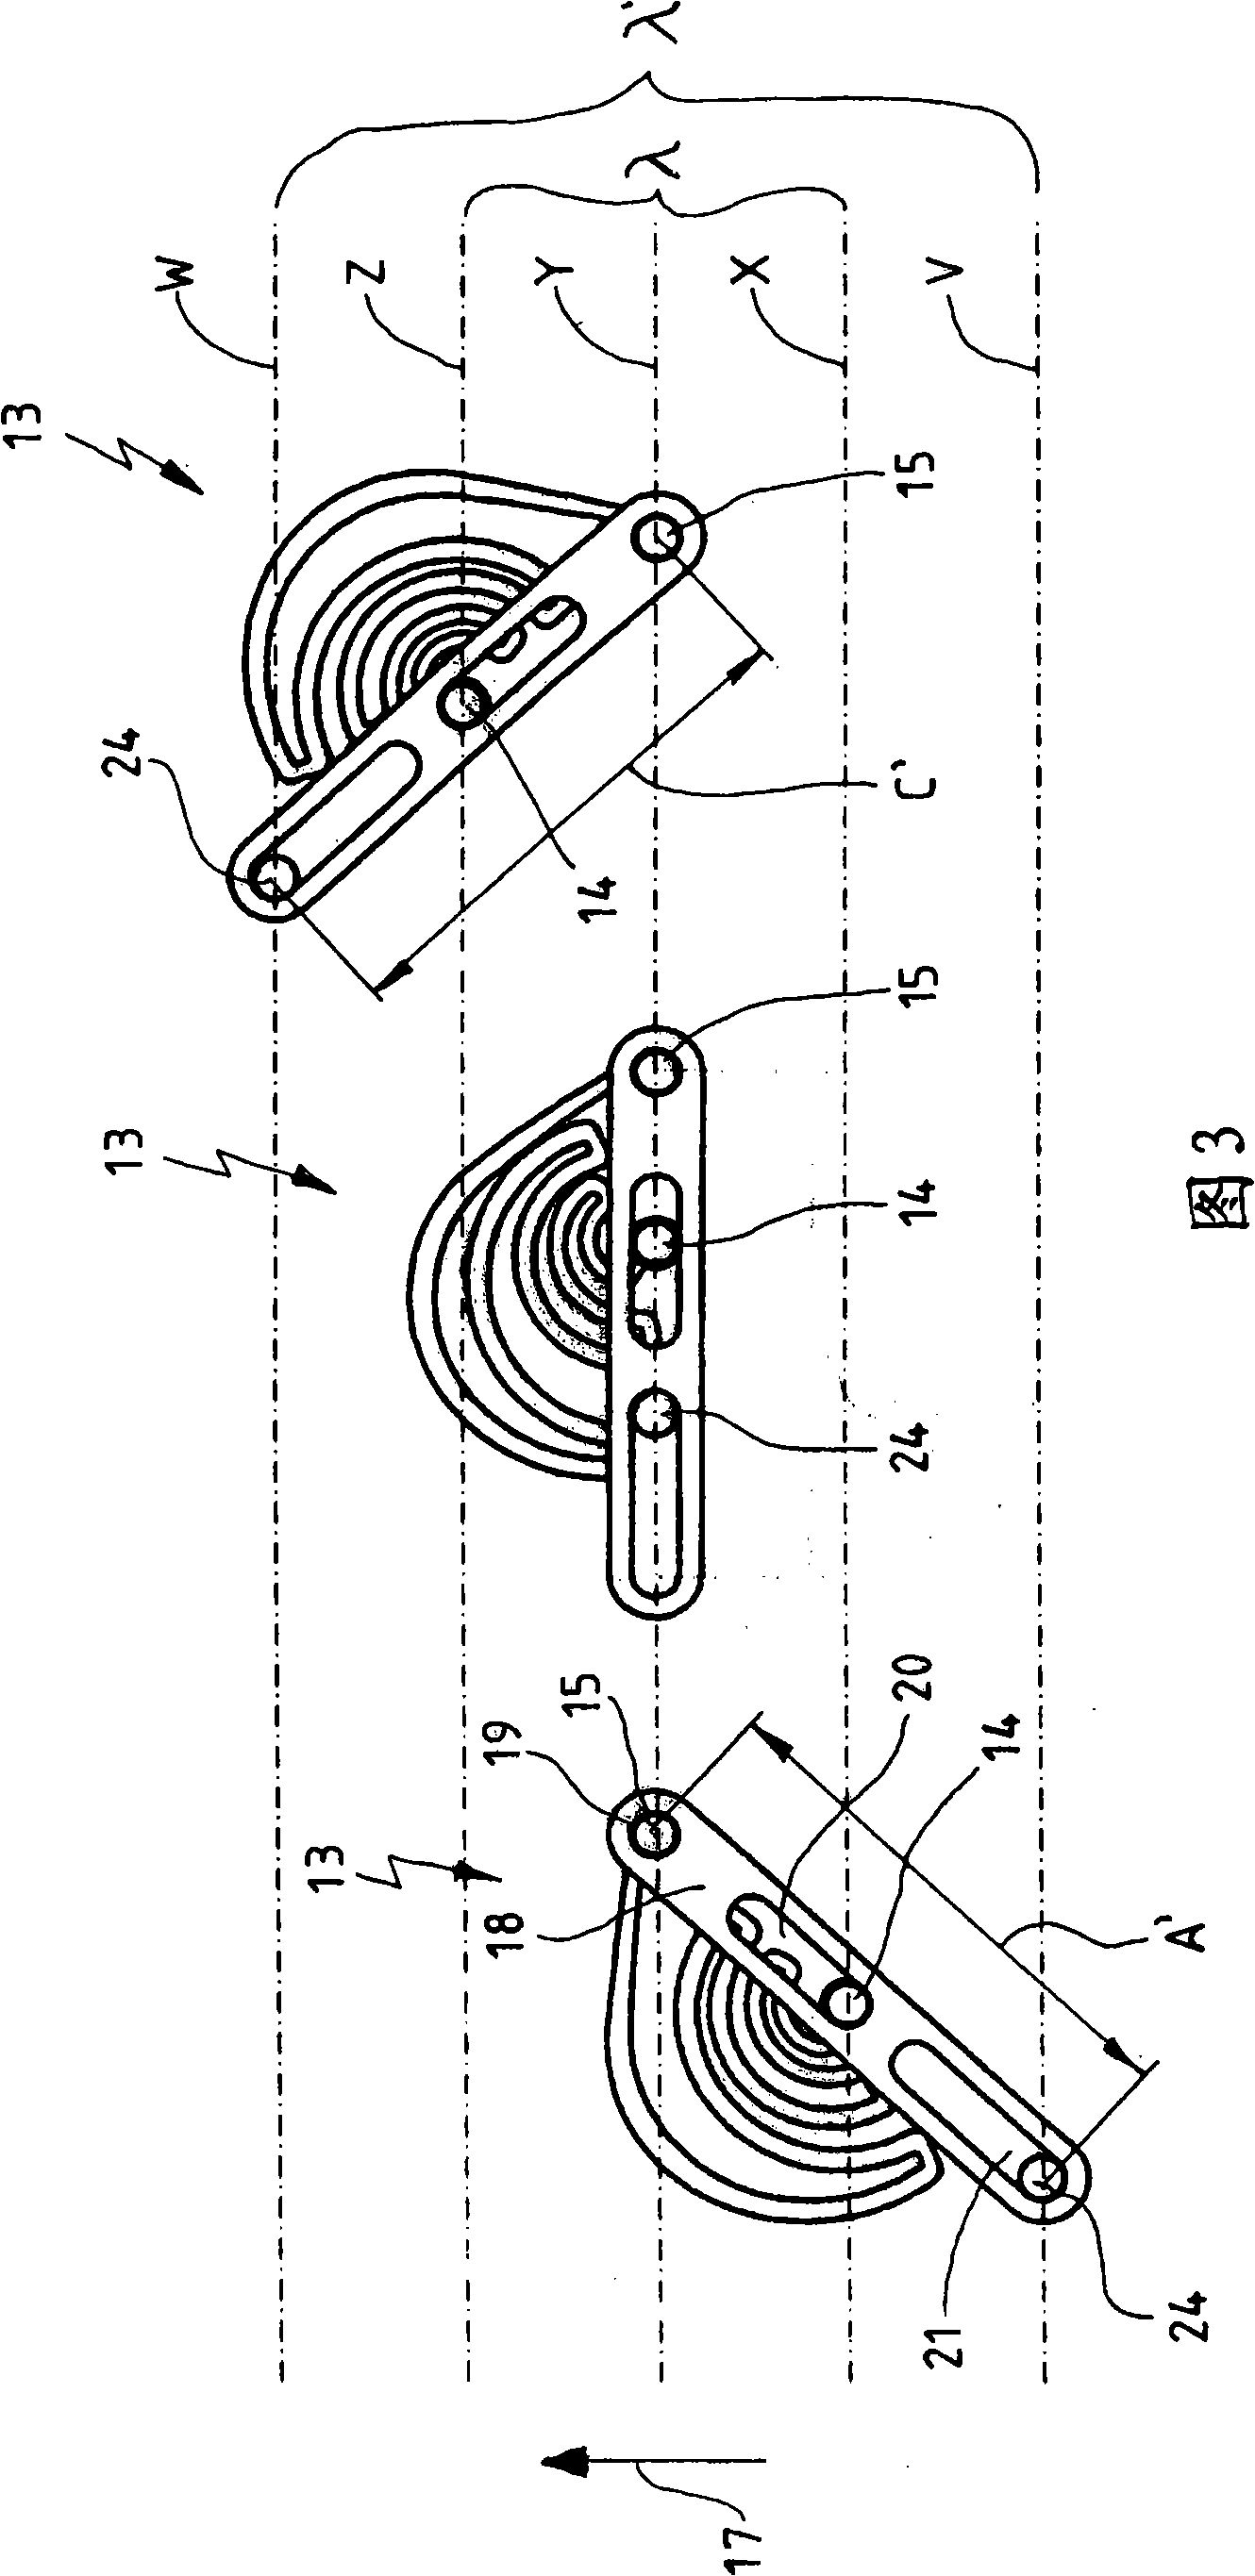 Slidable-type portable device, such as mobile radiotelephone, portable computer